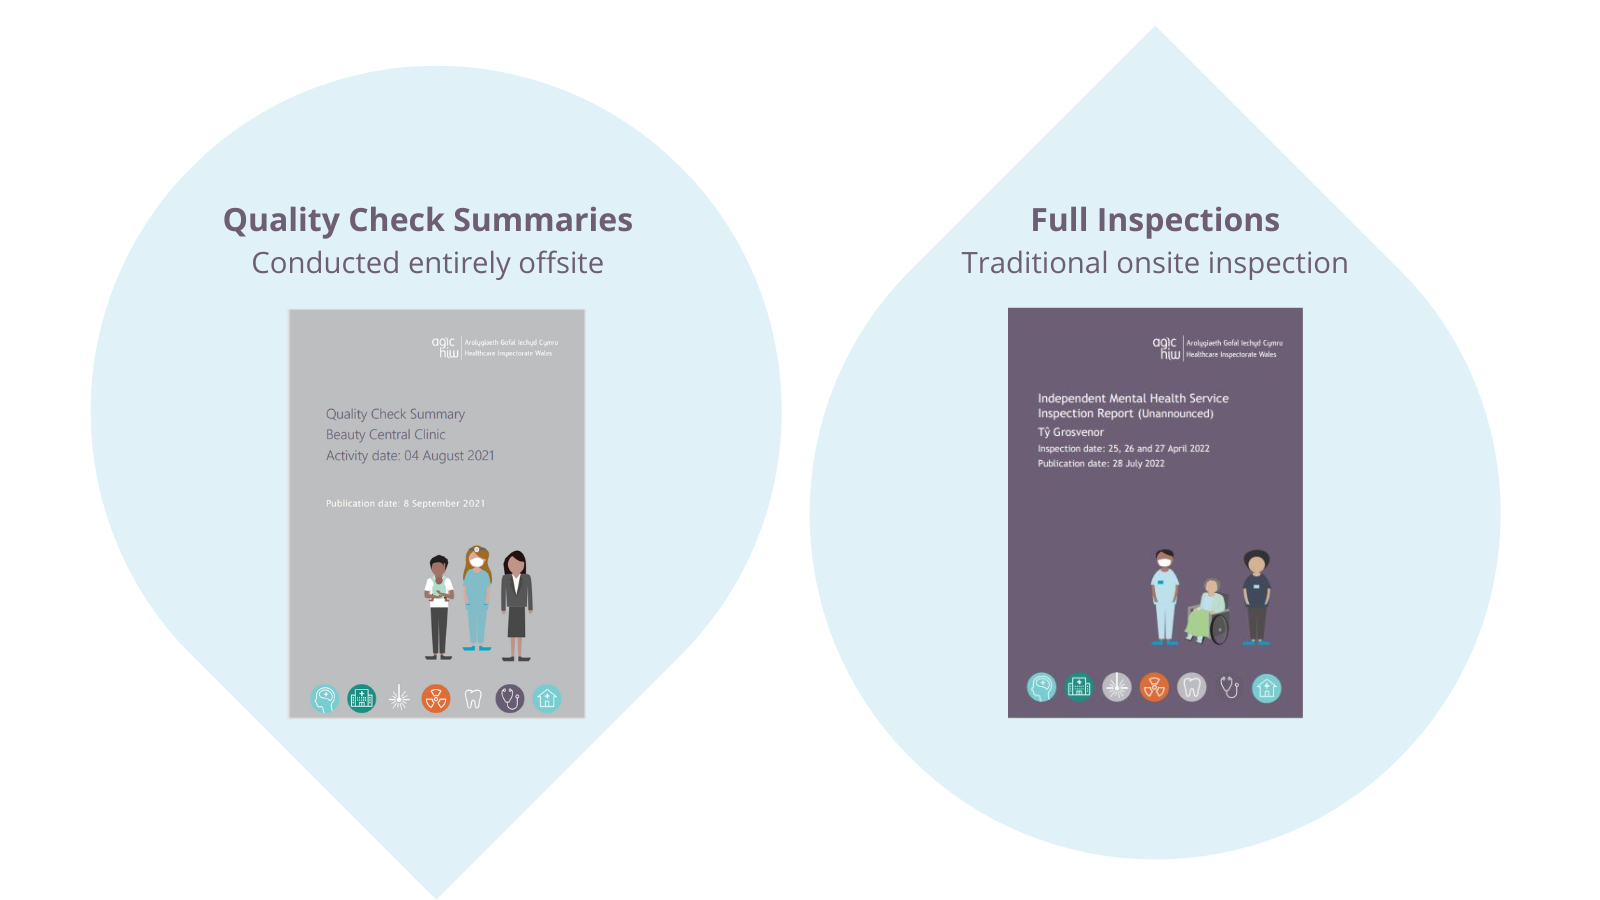 Picture of covers of the Quality Check Summaries - conducted entirely offsite and Full Inspections - traditional onsite inspections